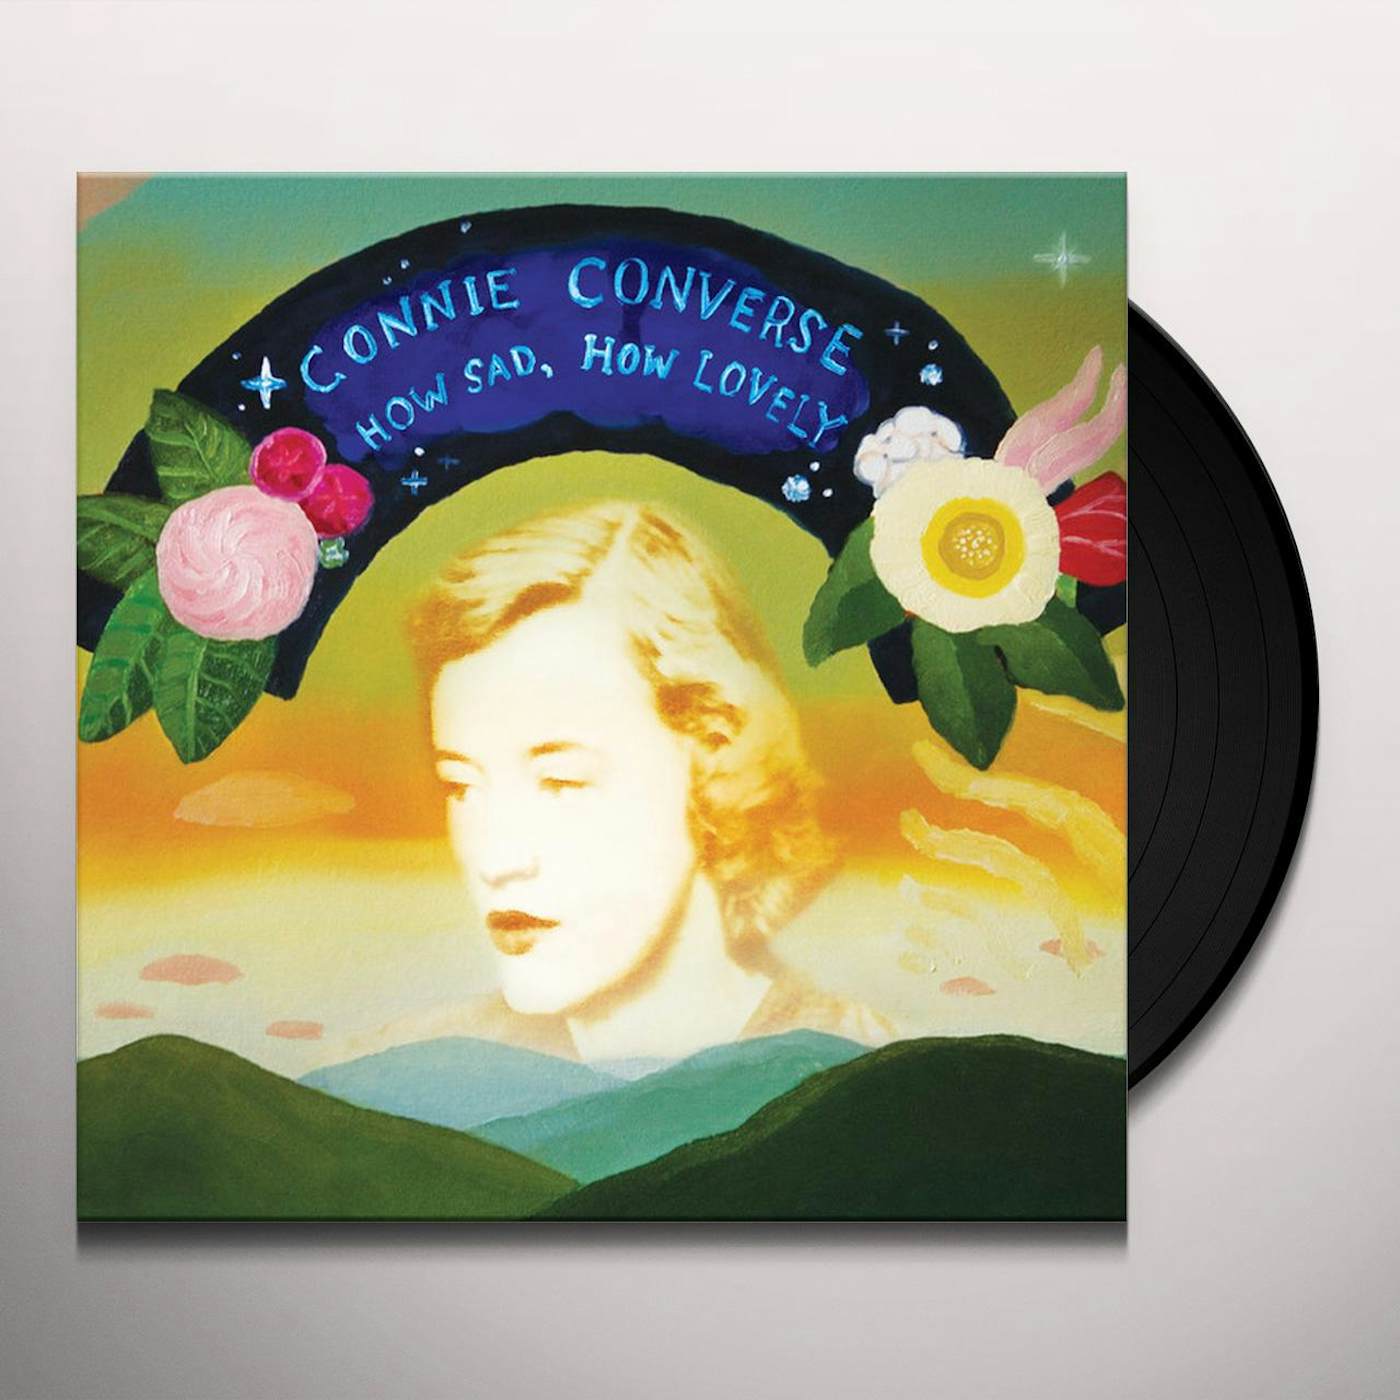 Connie Converse HOW SAD HOW LOVELY Vinyl Record